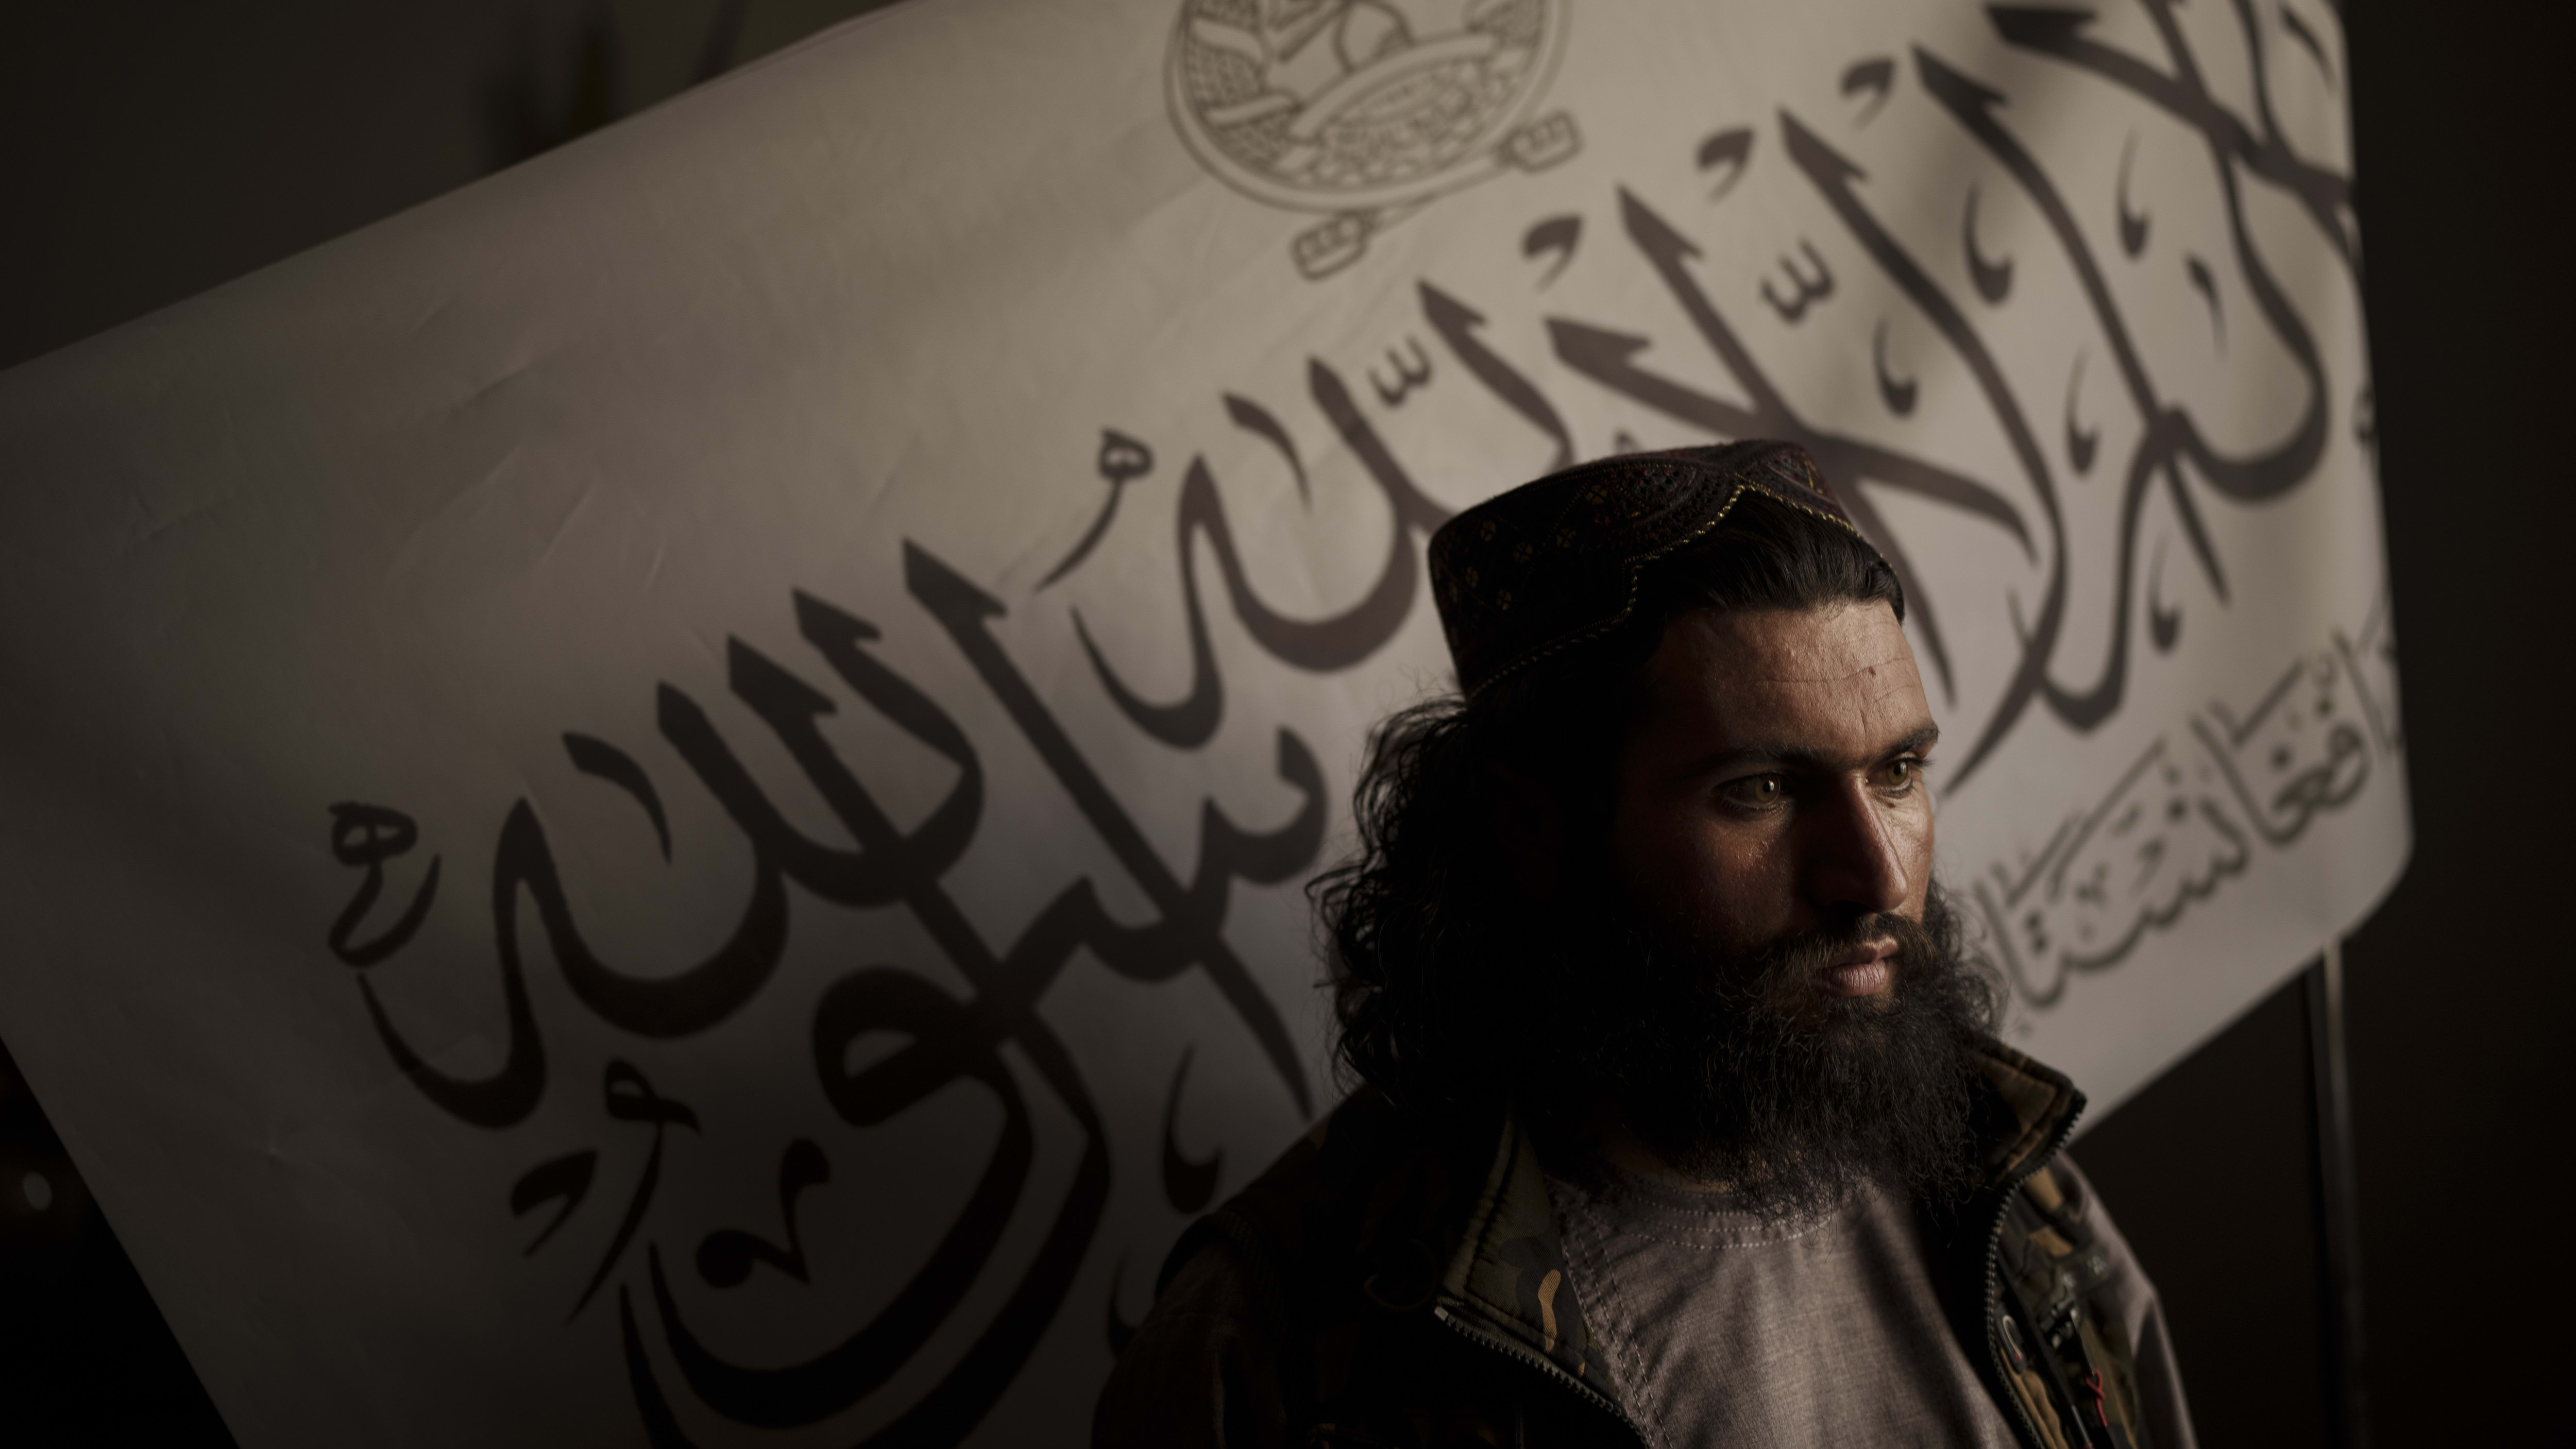 A Taliban official in front of a flag.